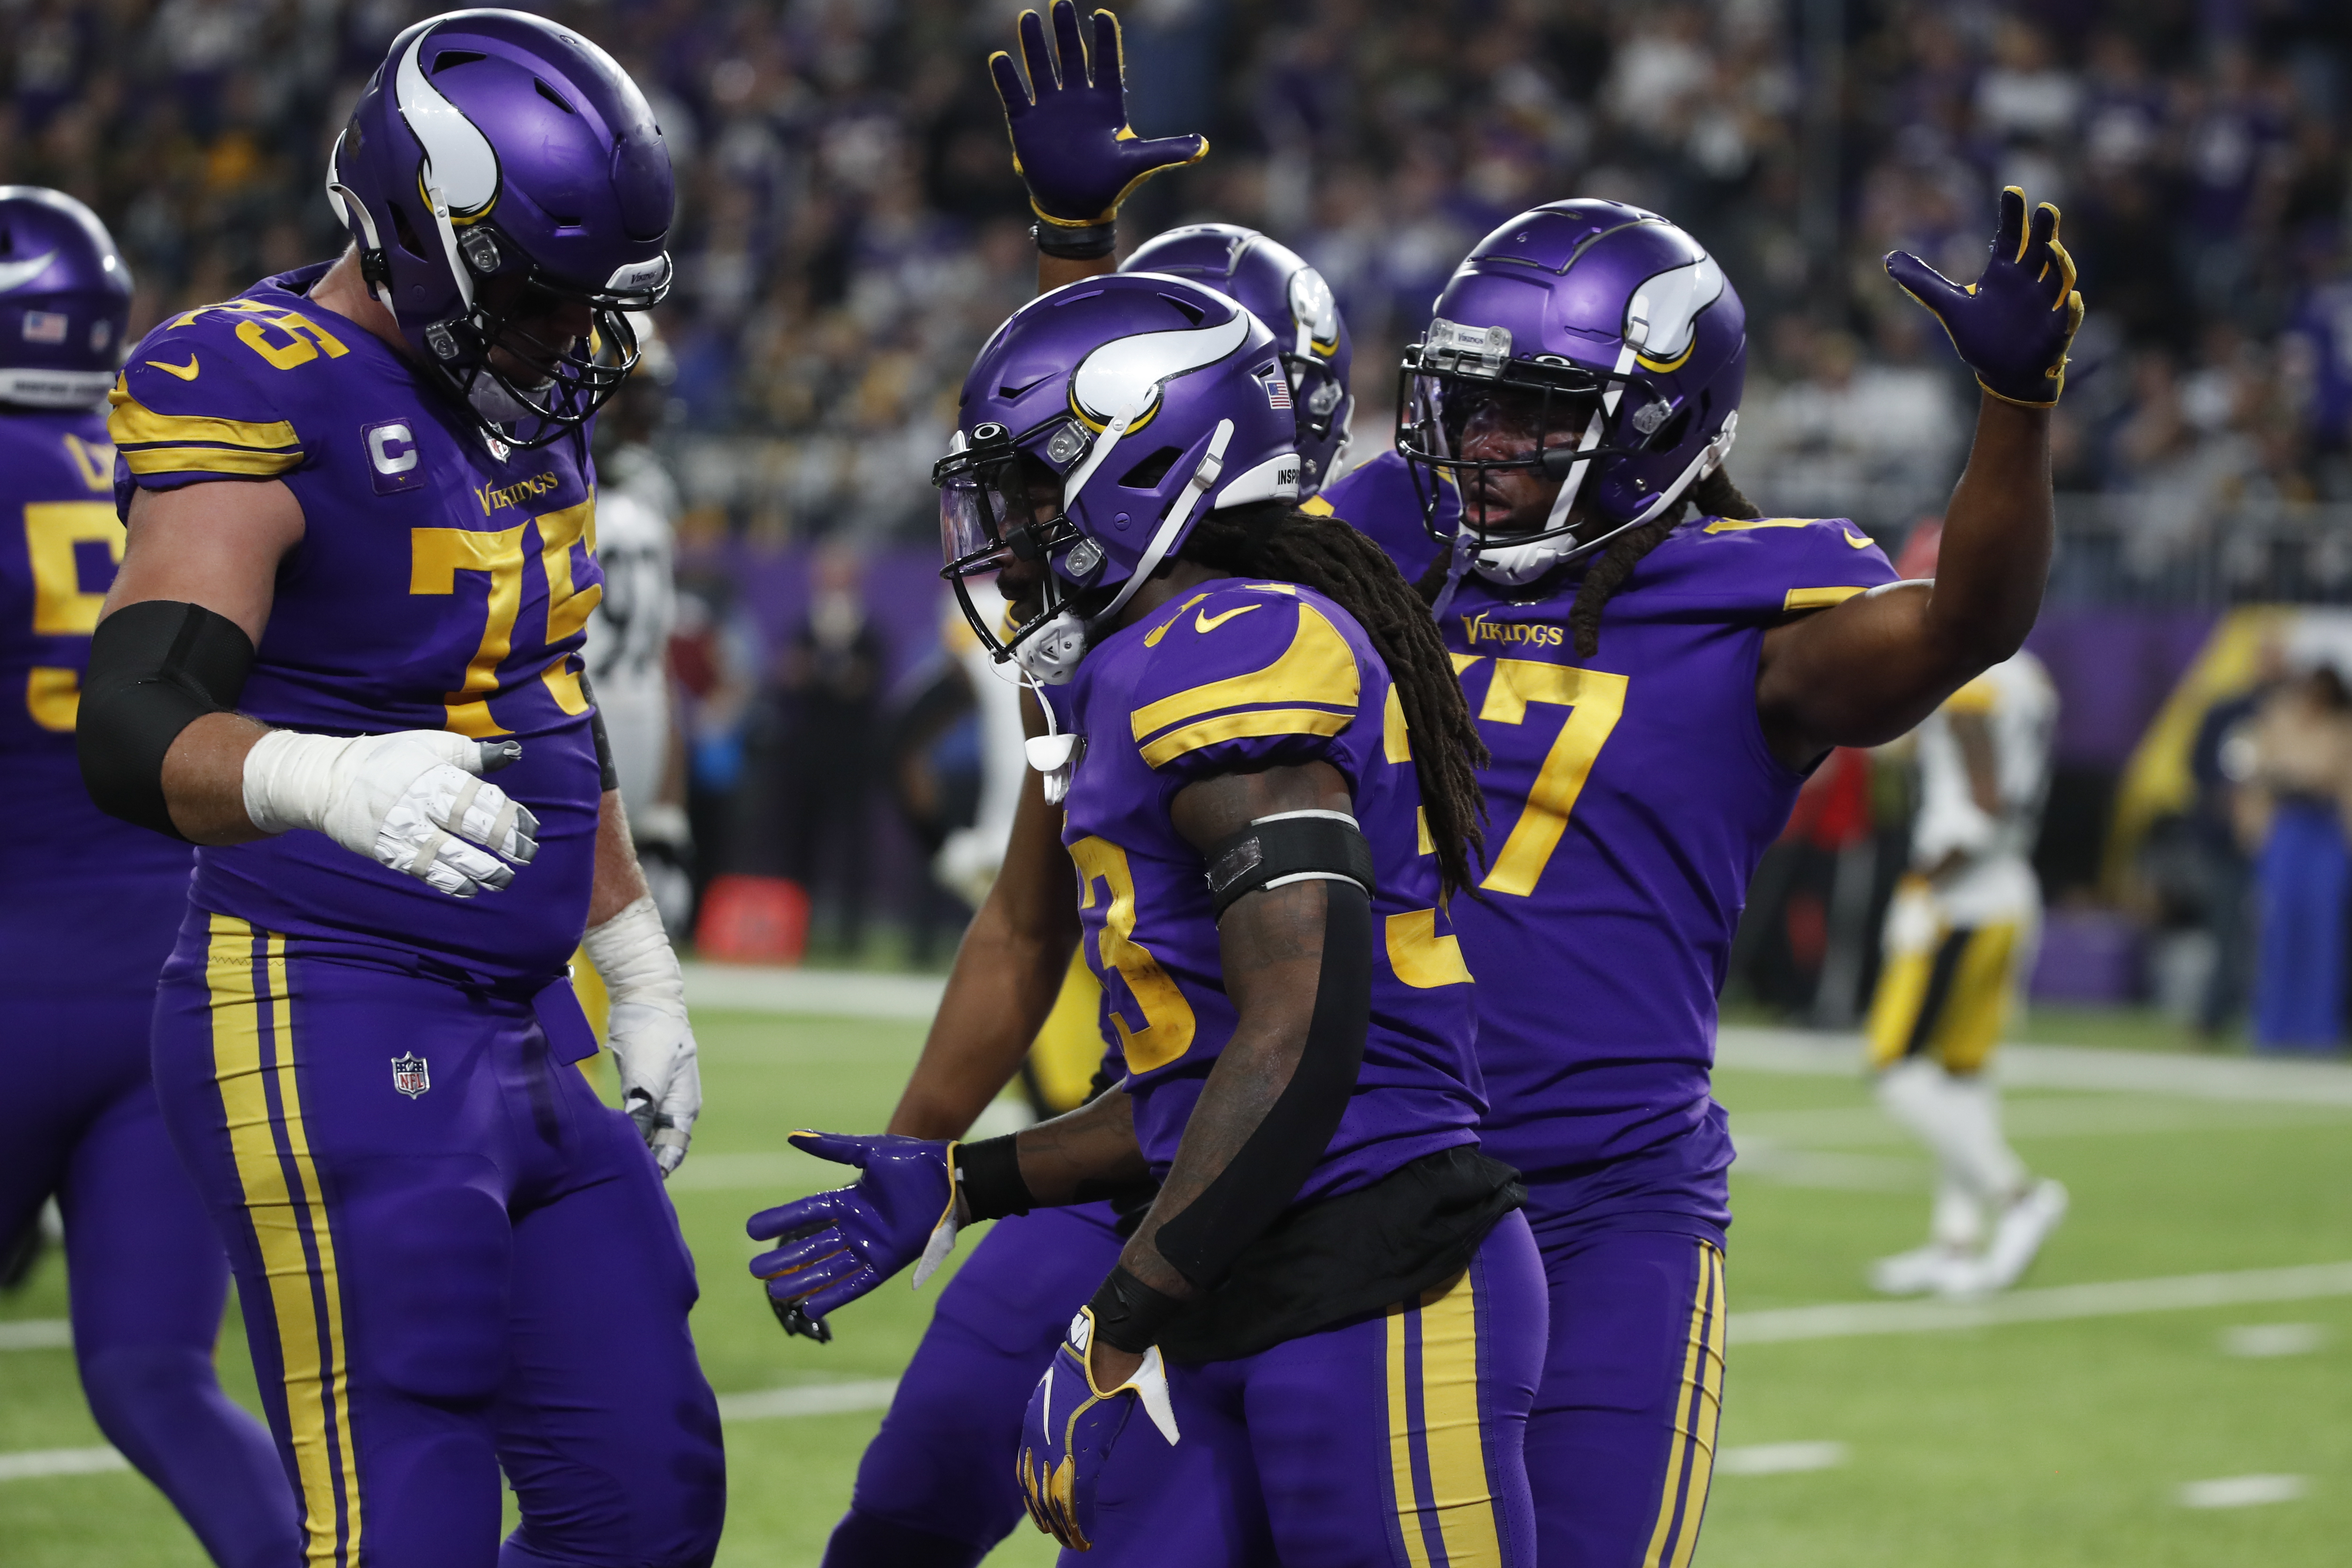 Vikings Fend off Steelers' Furious 4th-Quarter Comeback to Capture